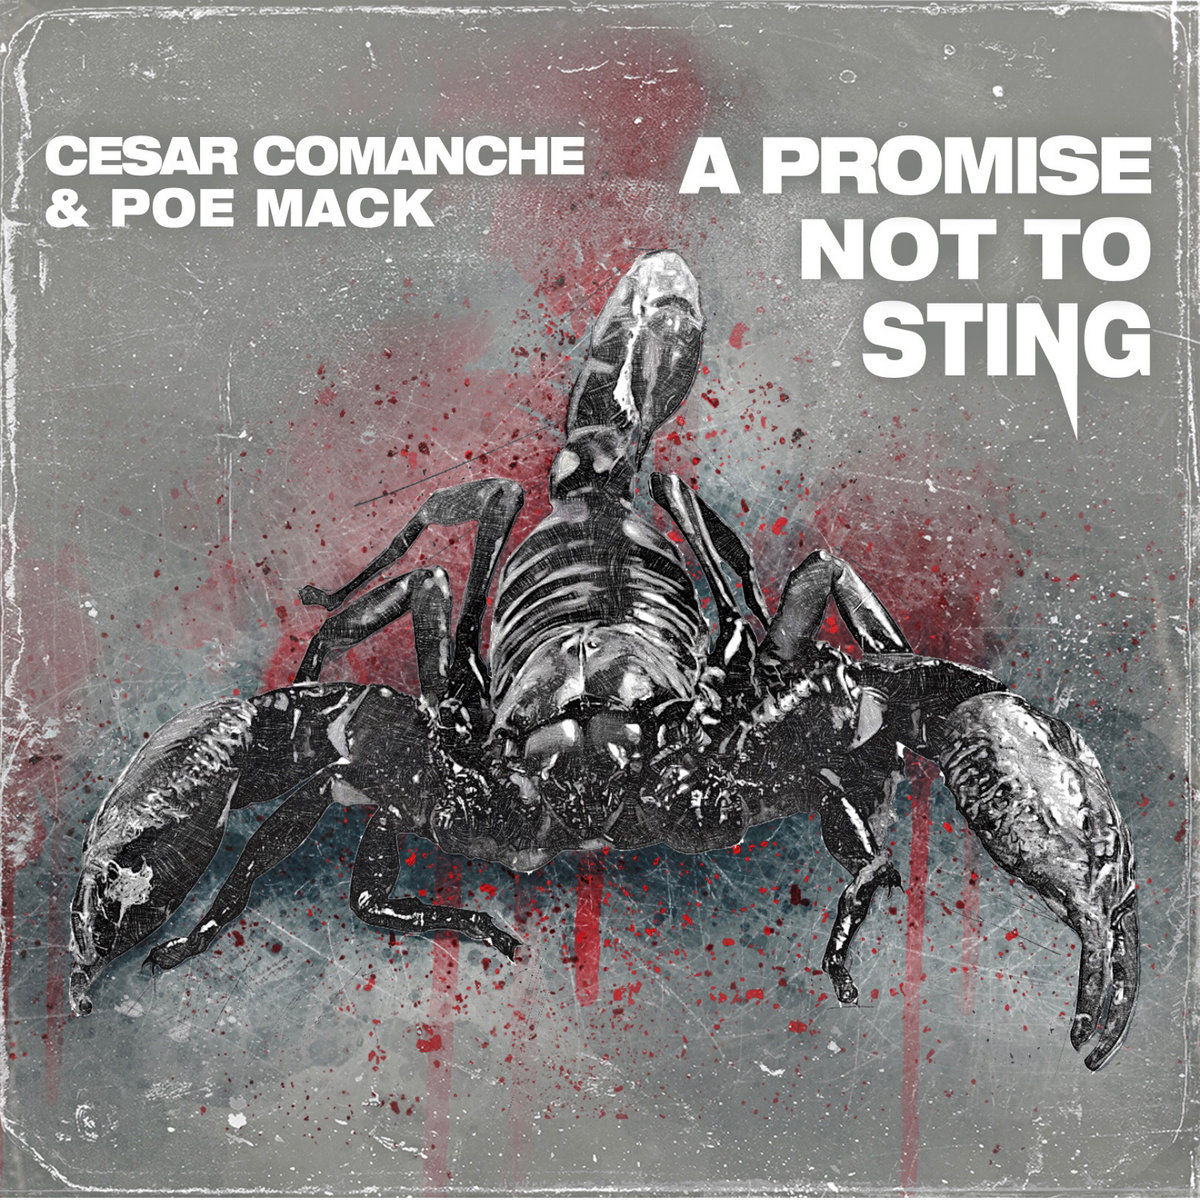 A_promise_not_to_sting_cesar_comanche_poe_mack